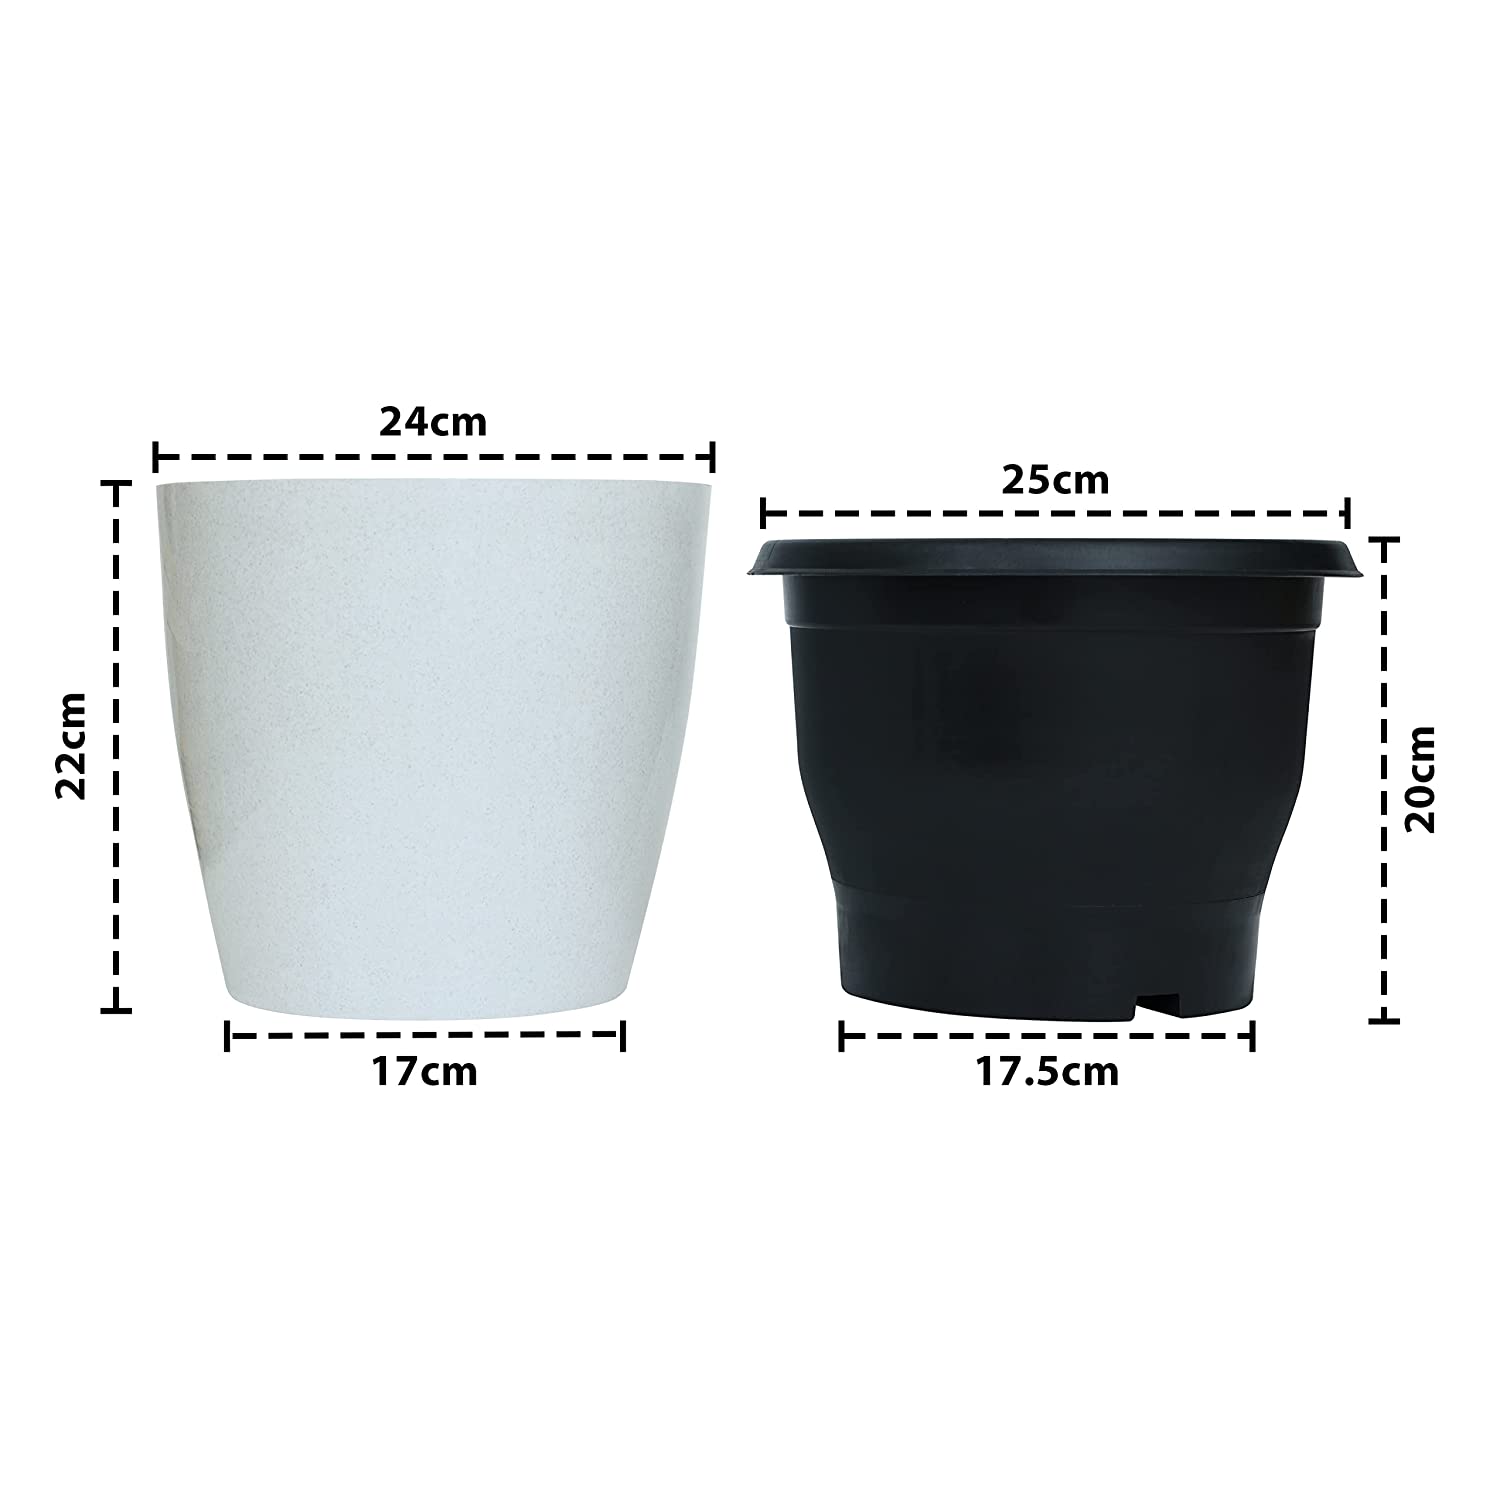 livzing 10 inch self watering planter pots plastic,virgin plastic pots for plants,modern plant pot,outer colored pot and inner black pot,flower pots for indoor/outdoor/balcony,white pack of 5